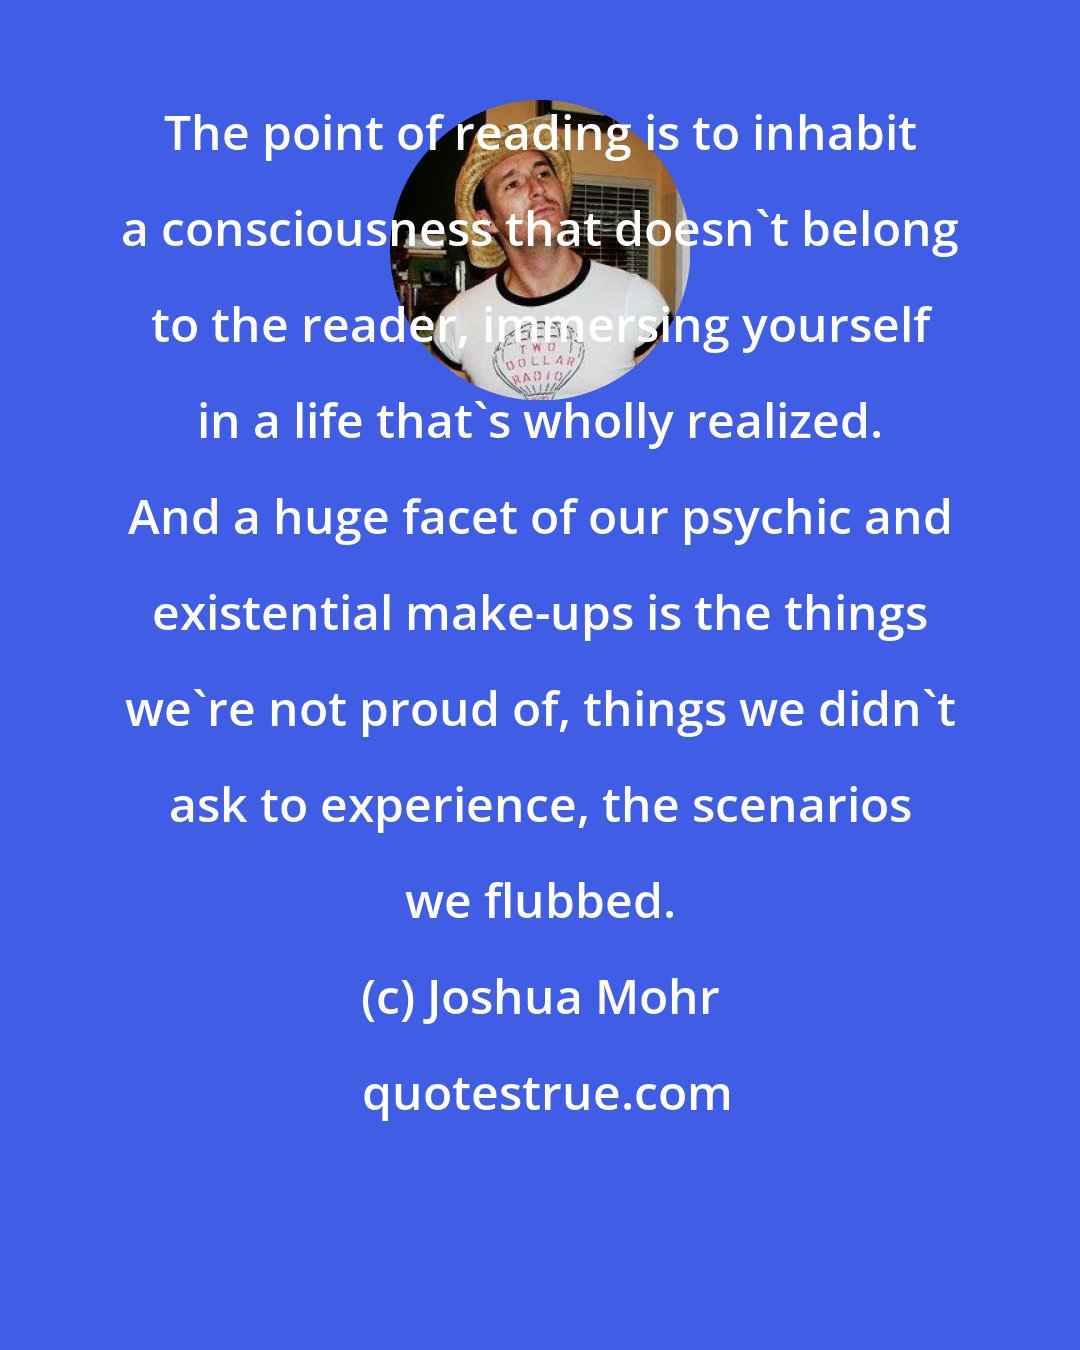 Joshua Mohr: The point of reading is to inhabit a consciousness that doesn't belong to the reader, immersing yourself in a life that's wholly realized. And a huge facet of our psychic and existential make-ups is the things we're not proud of, things we didn't ask to experience, the scenarios we flubbed.